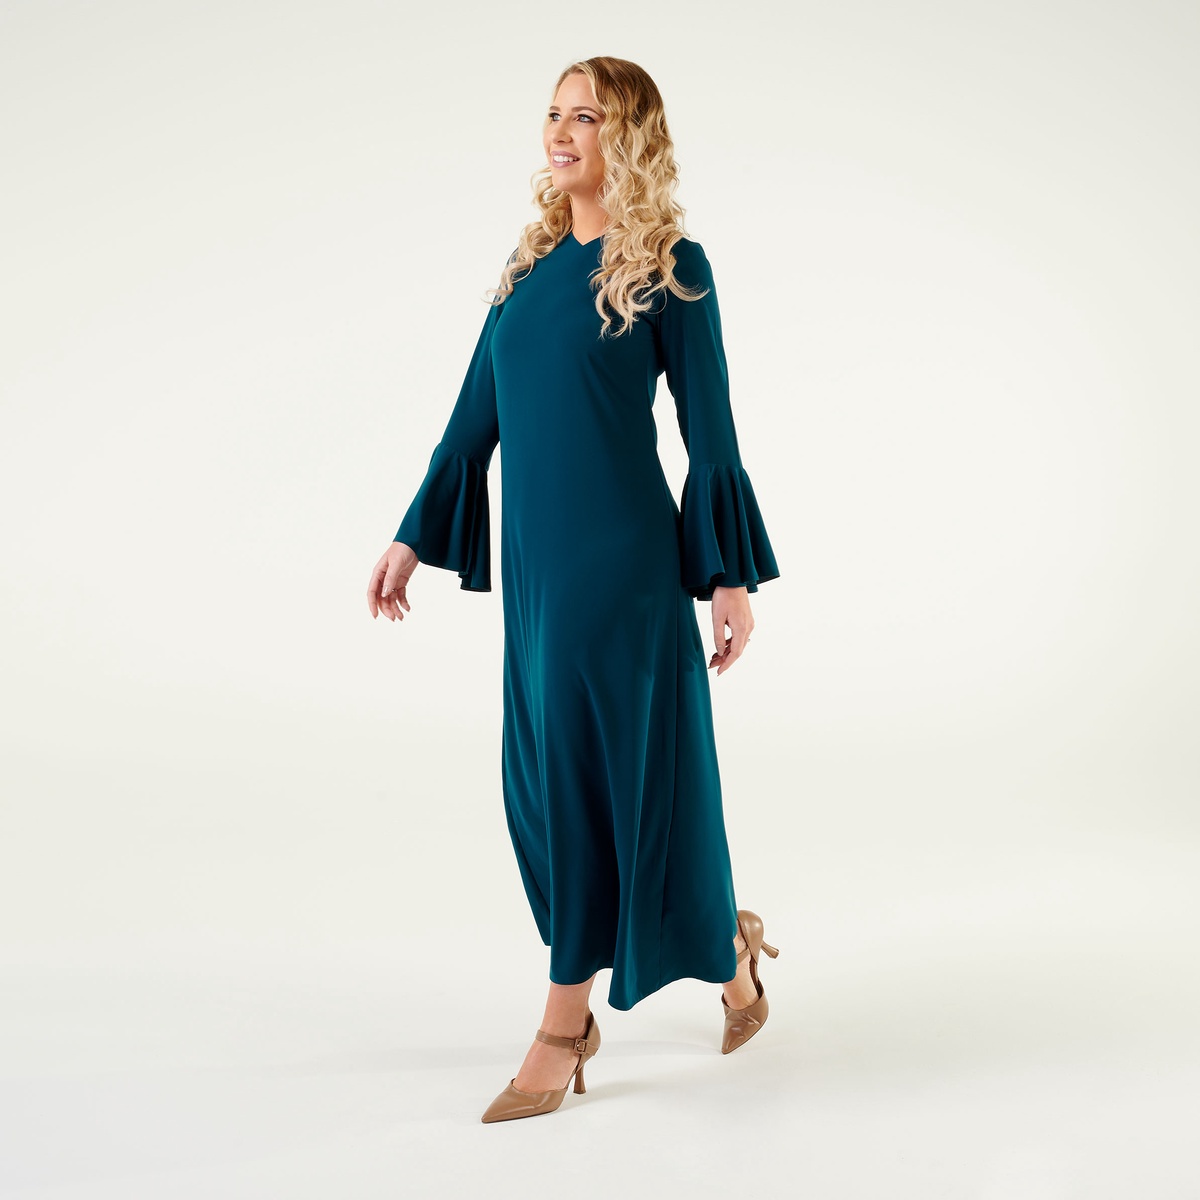 Sculpting Elegance: Long Sleeve Maxi Dresses with Rounded Clutch"